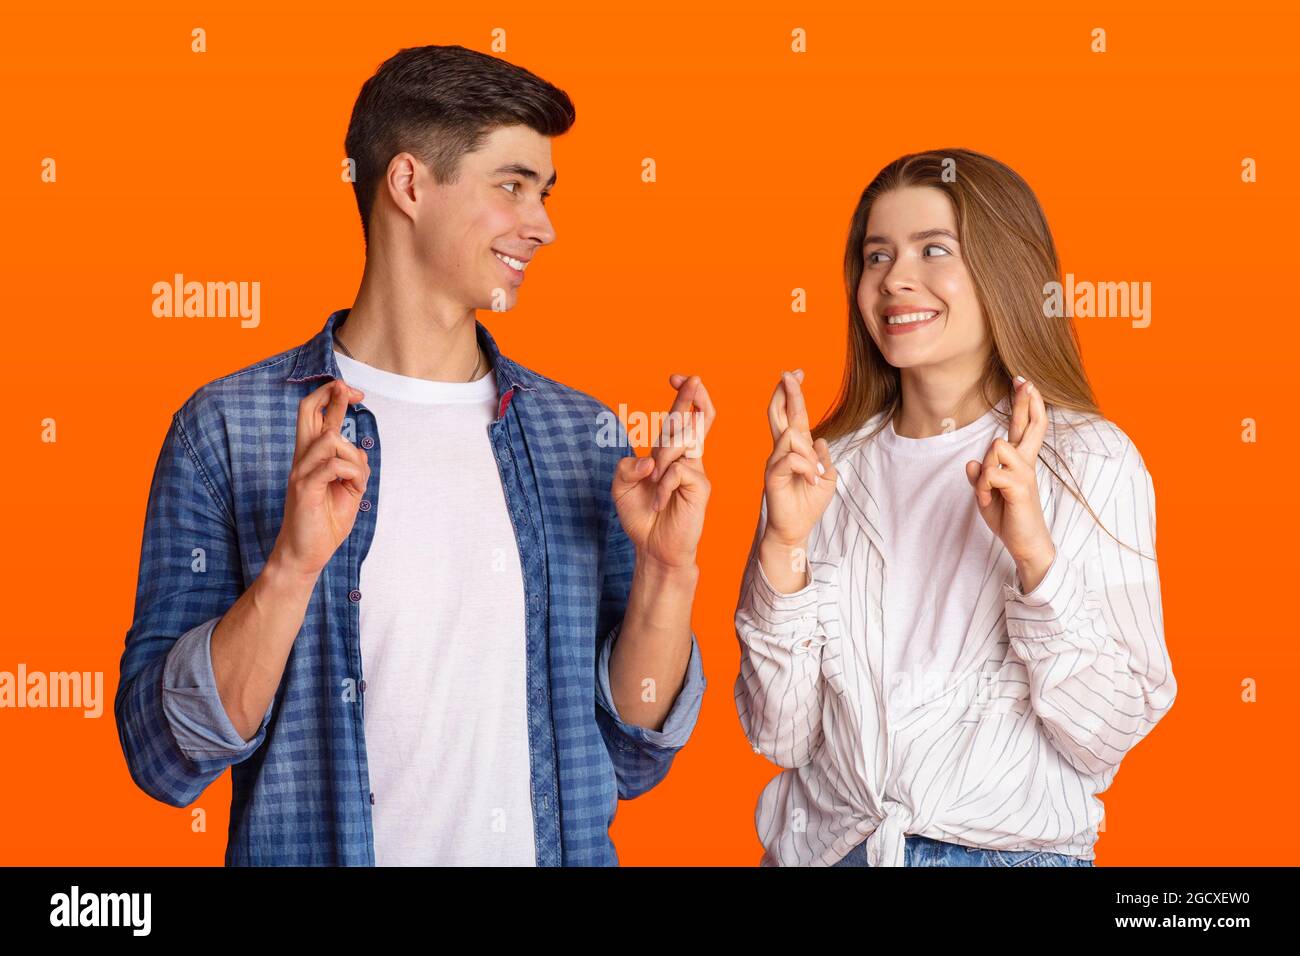 Luck and superstition. Cheerful millennial couple gesturing crossing fingers in hope Stock Photo